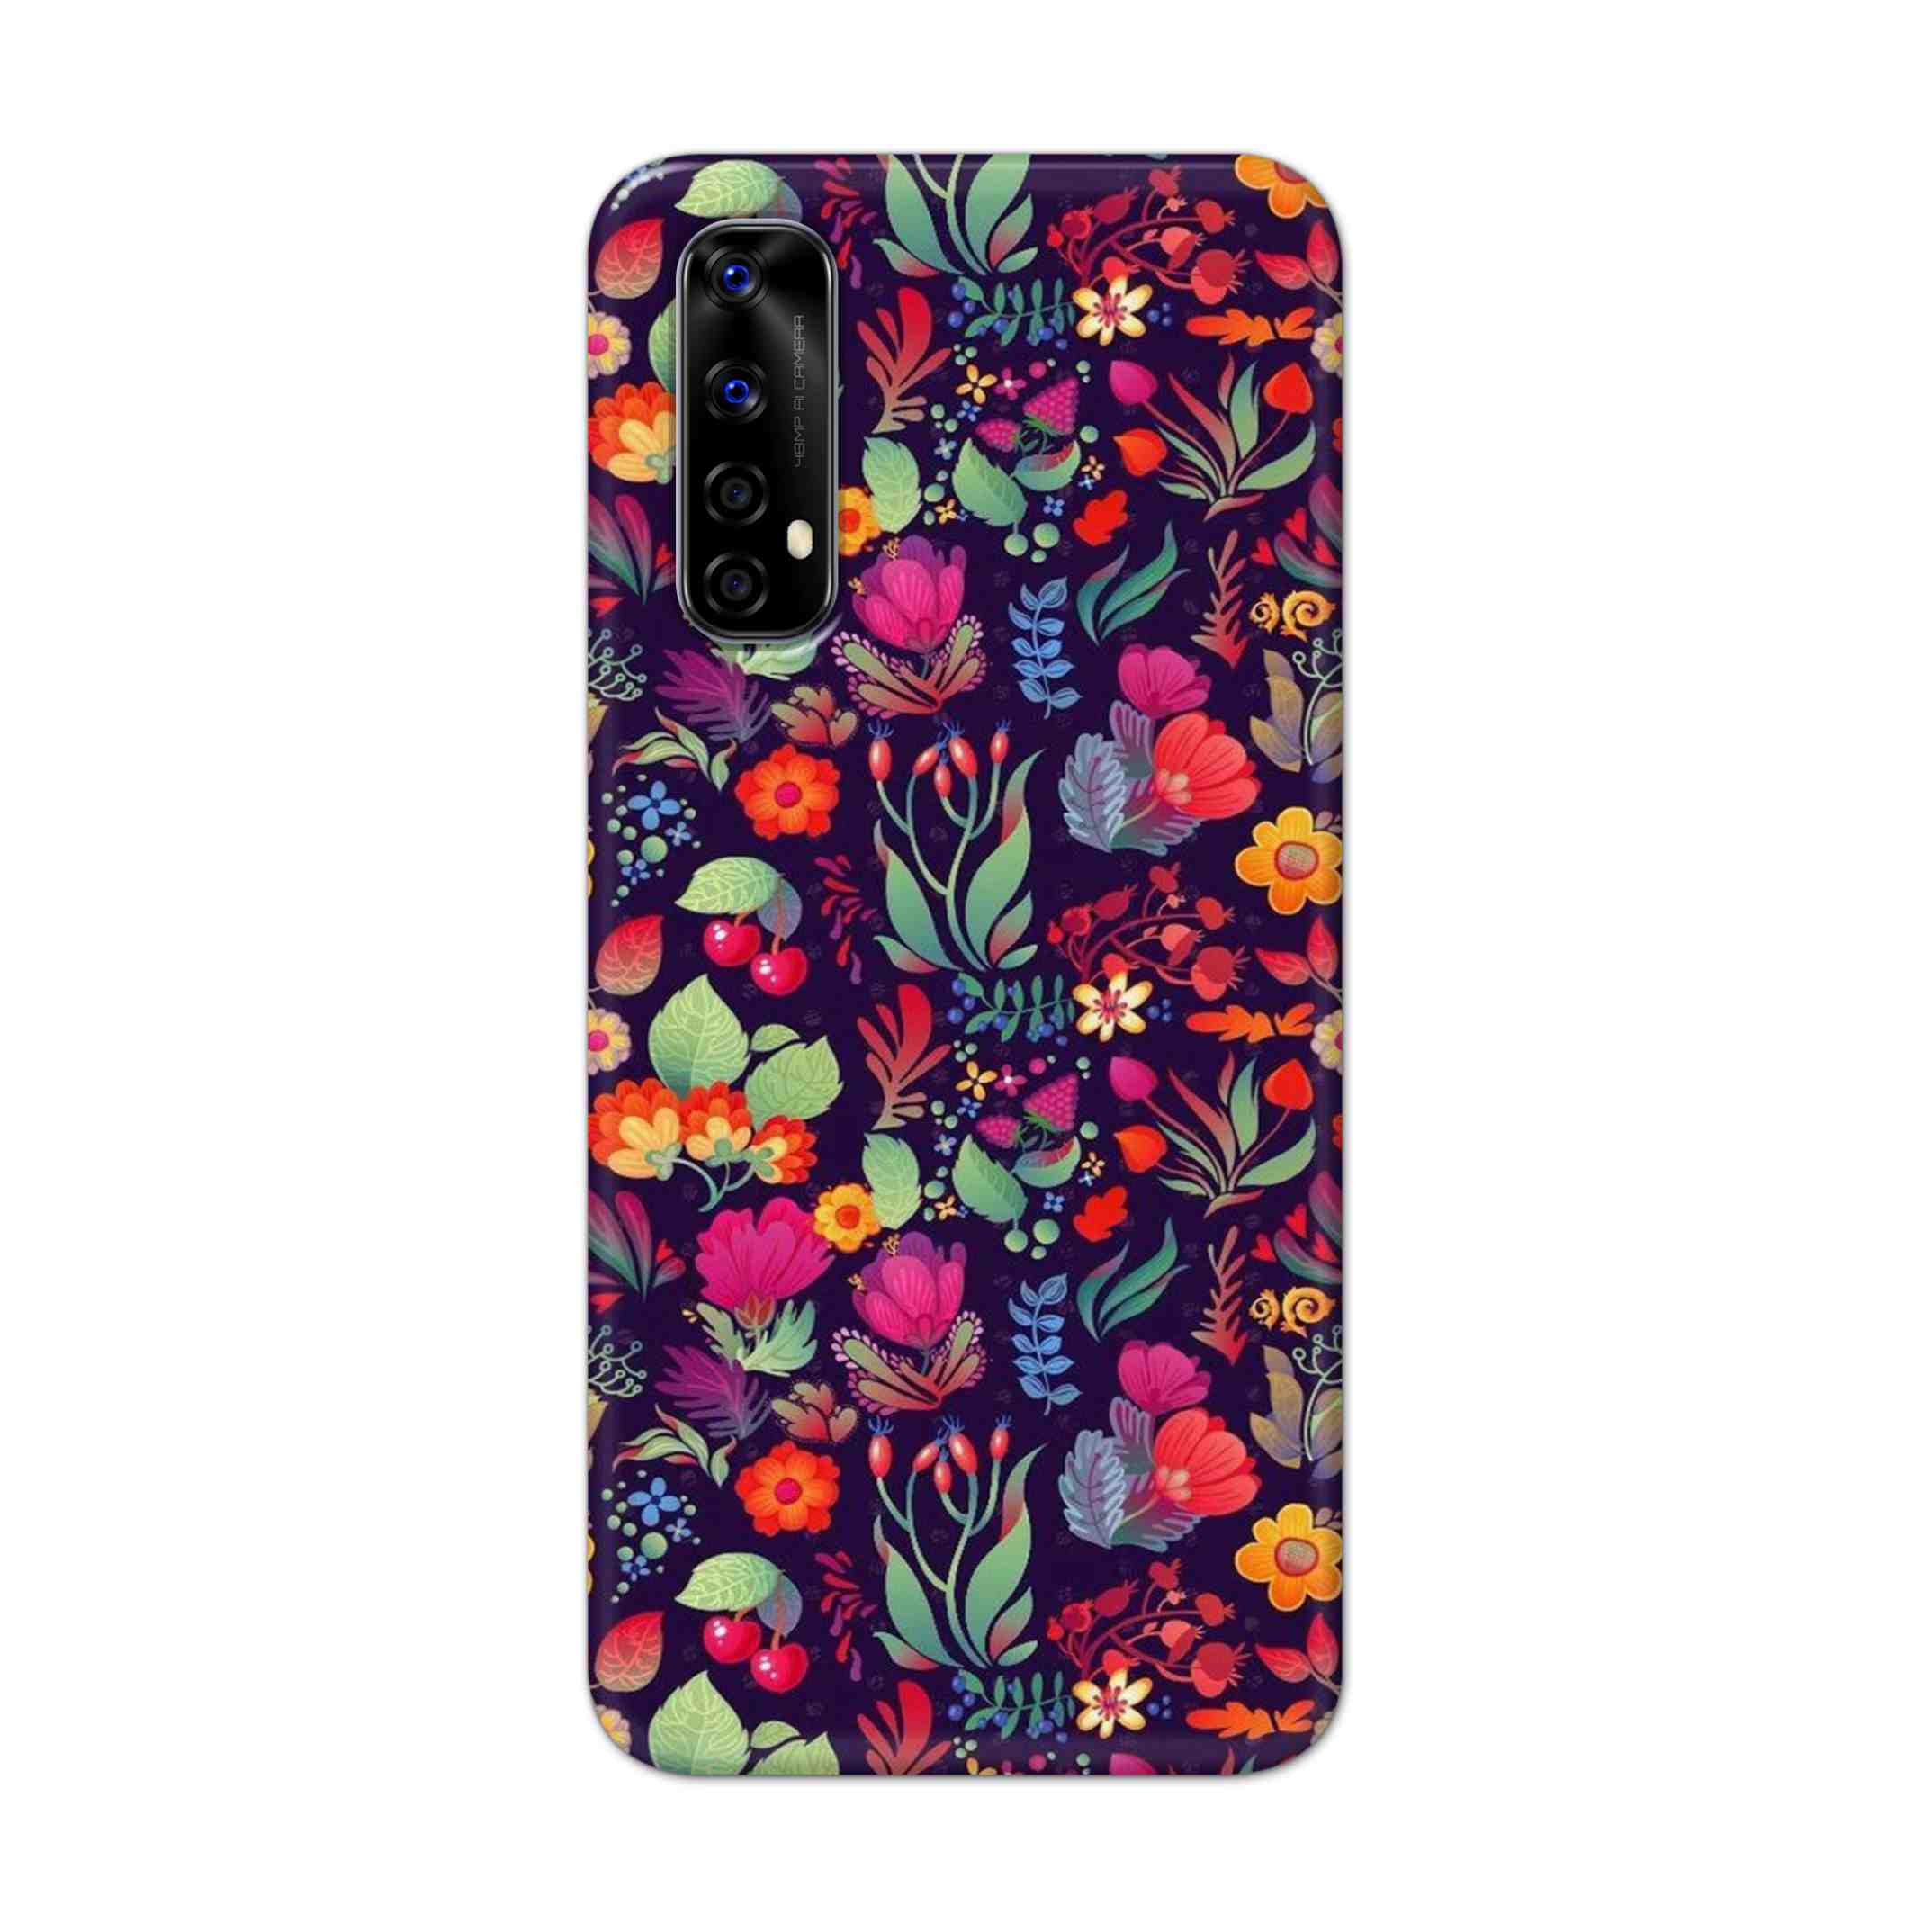 Buy Fruits Flower Hard Back Mobile Phone Case Cover For Realme Narzo 20 Pro Online